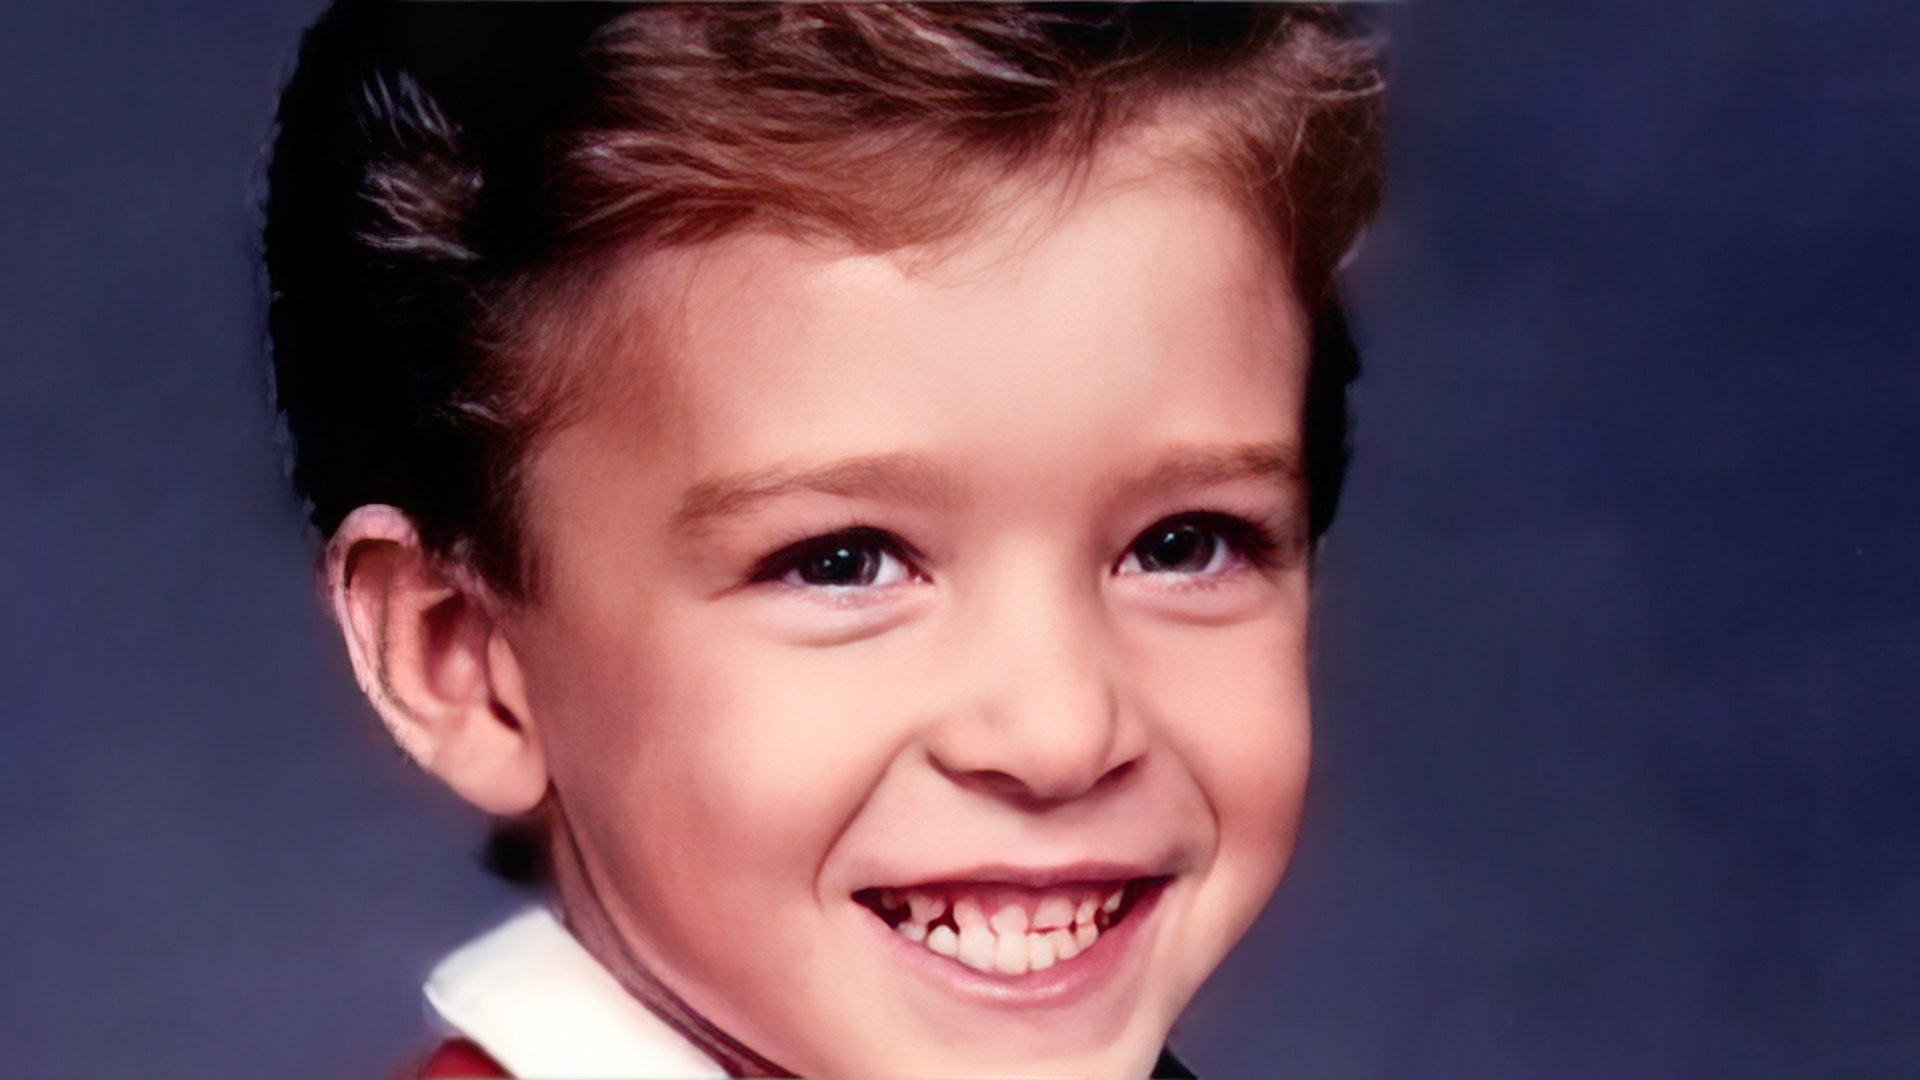 Justin Timberlake grew up as a happy boy